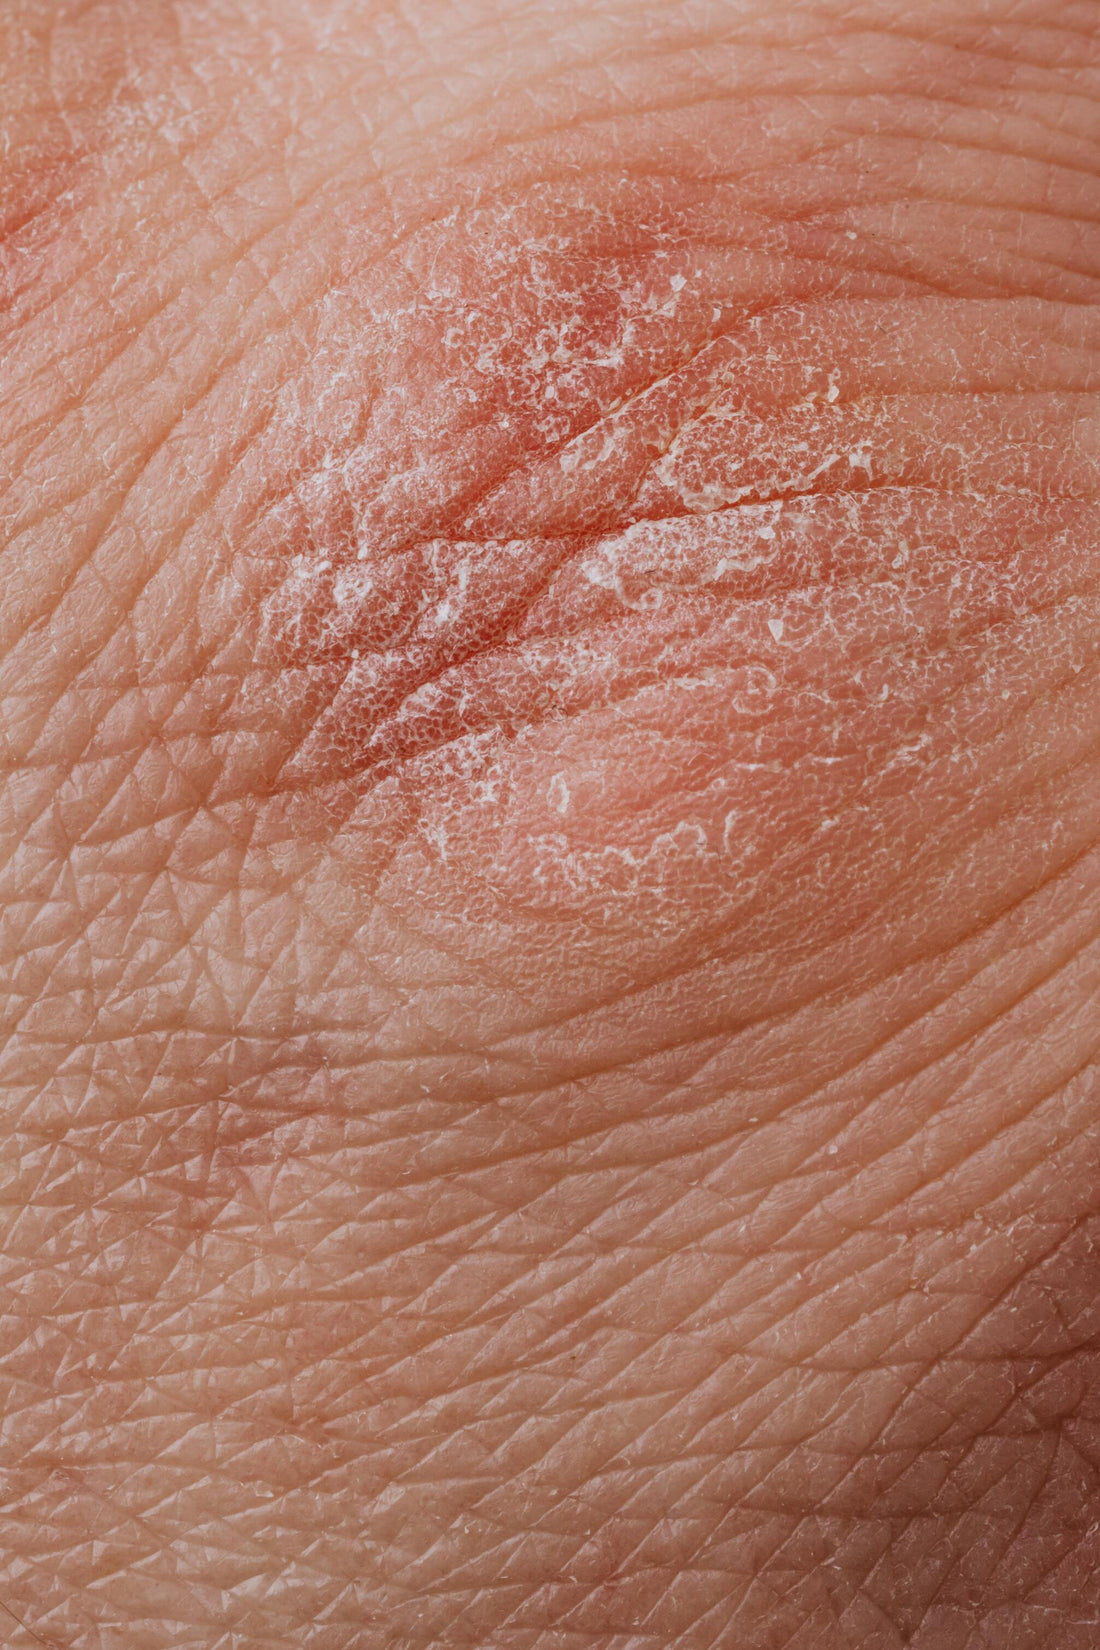 Dry, Itchy Skin? Here's What You Can Do About It!